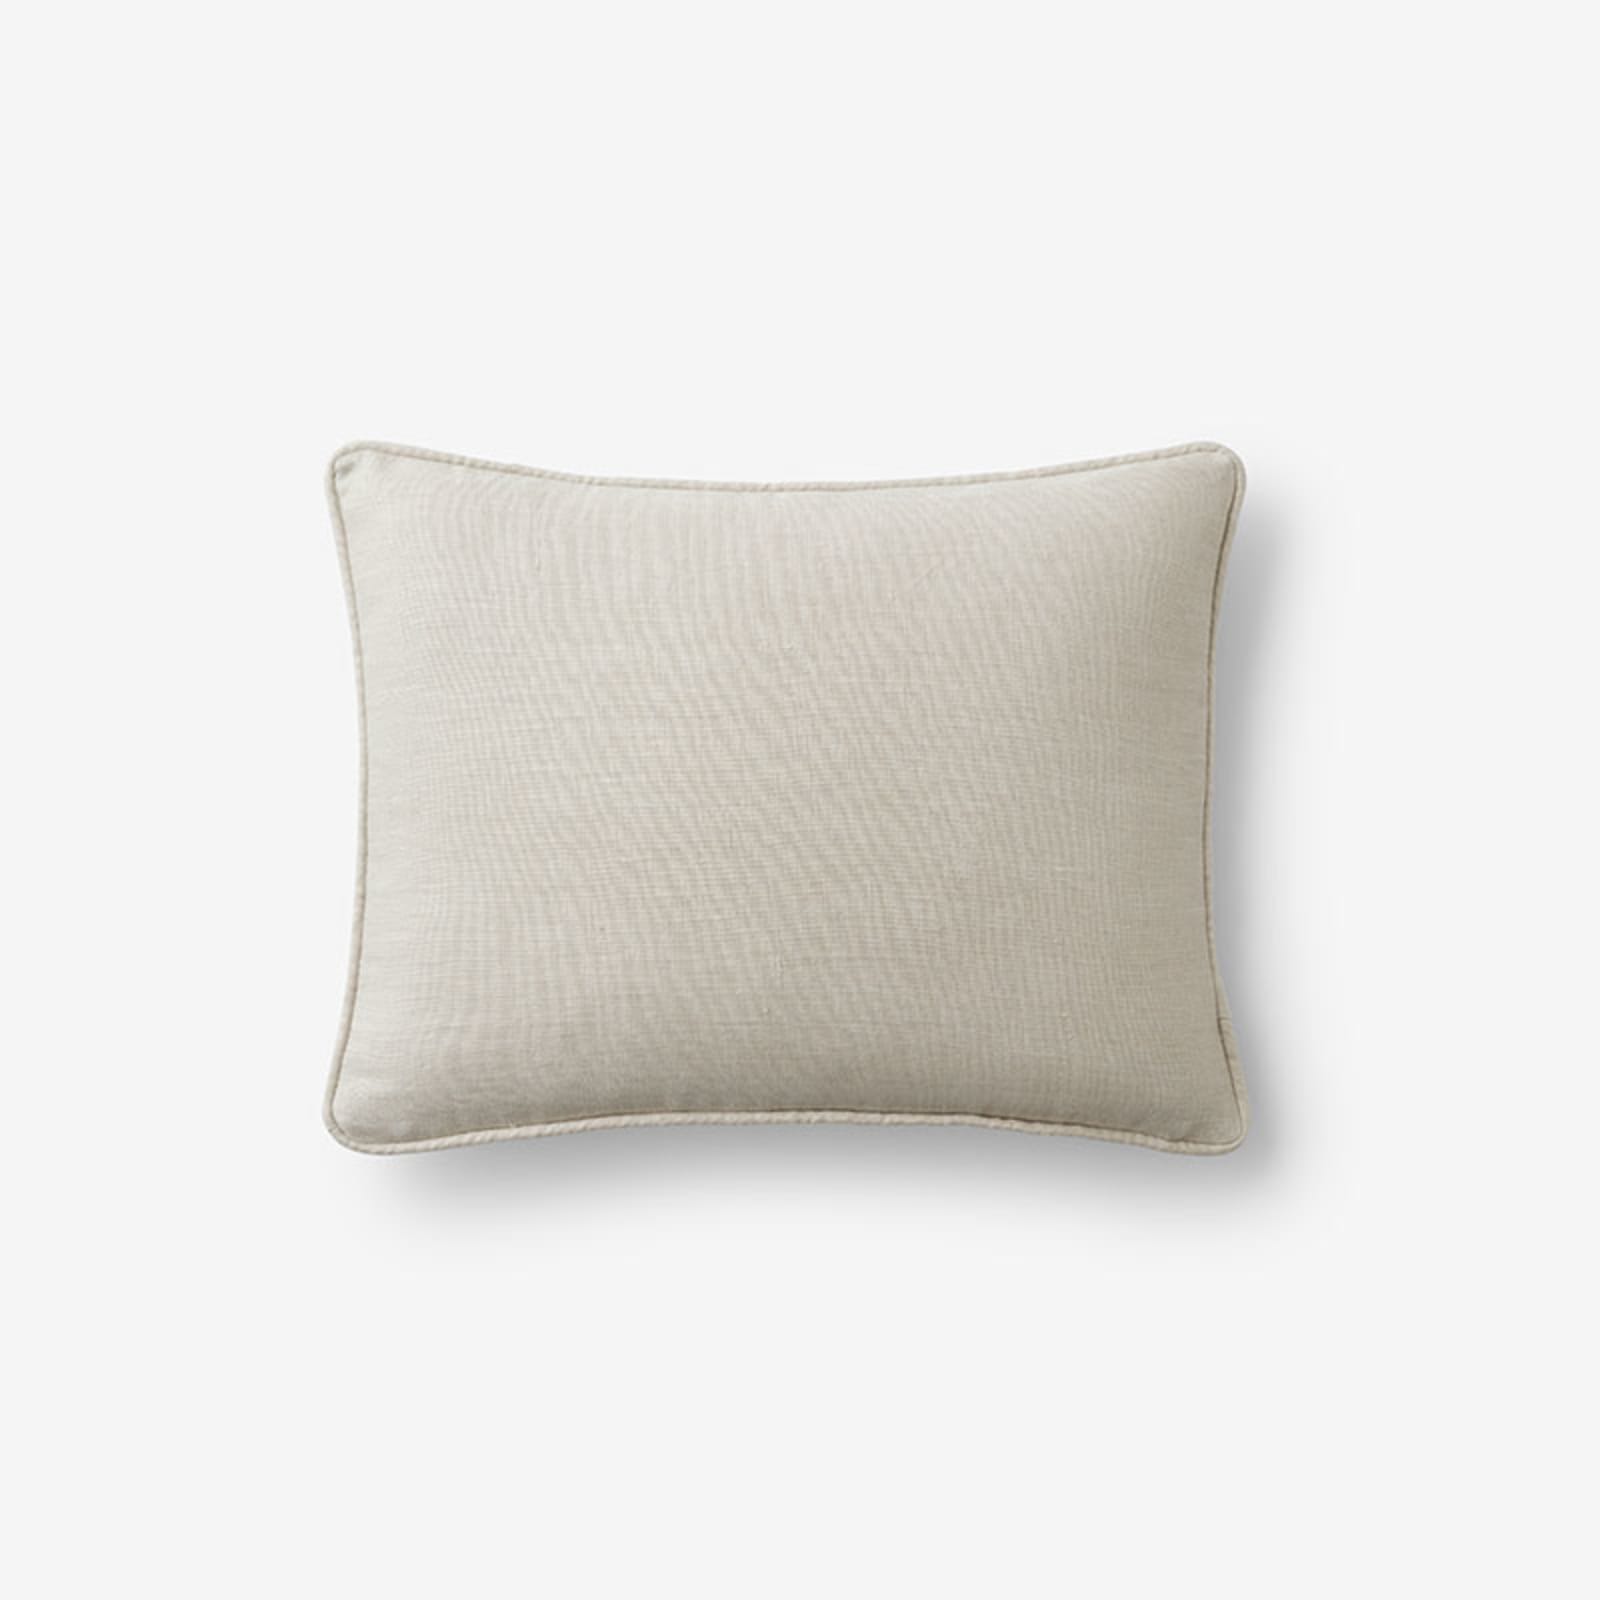 Linen Pillow Cover - Oatmeal | The Company Store